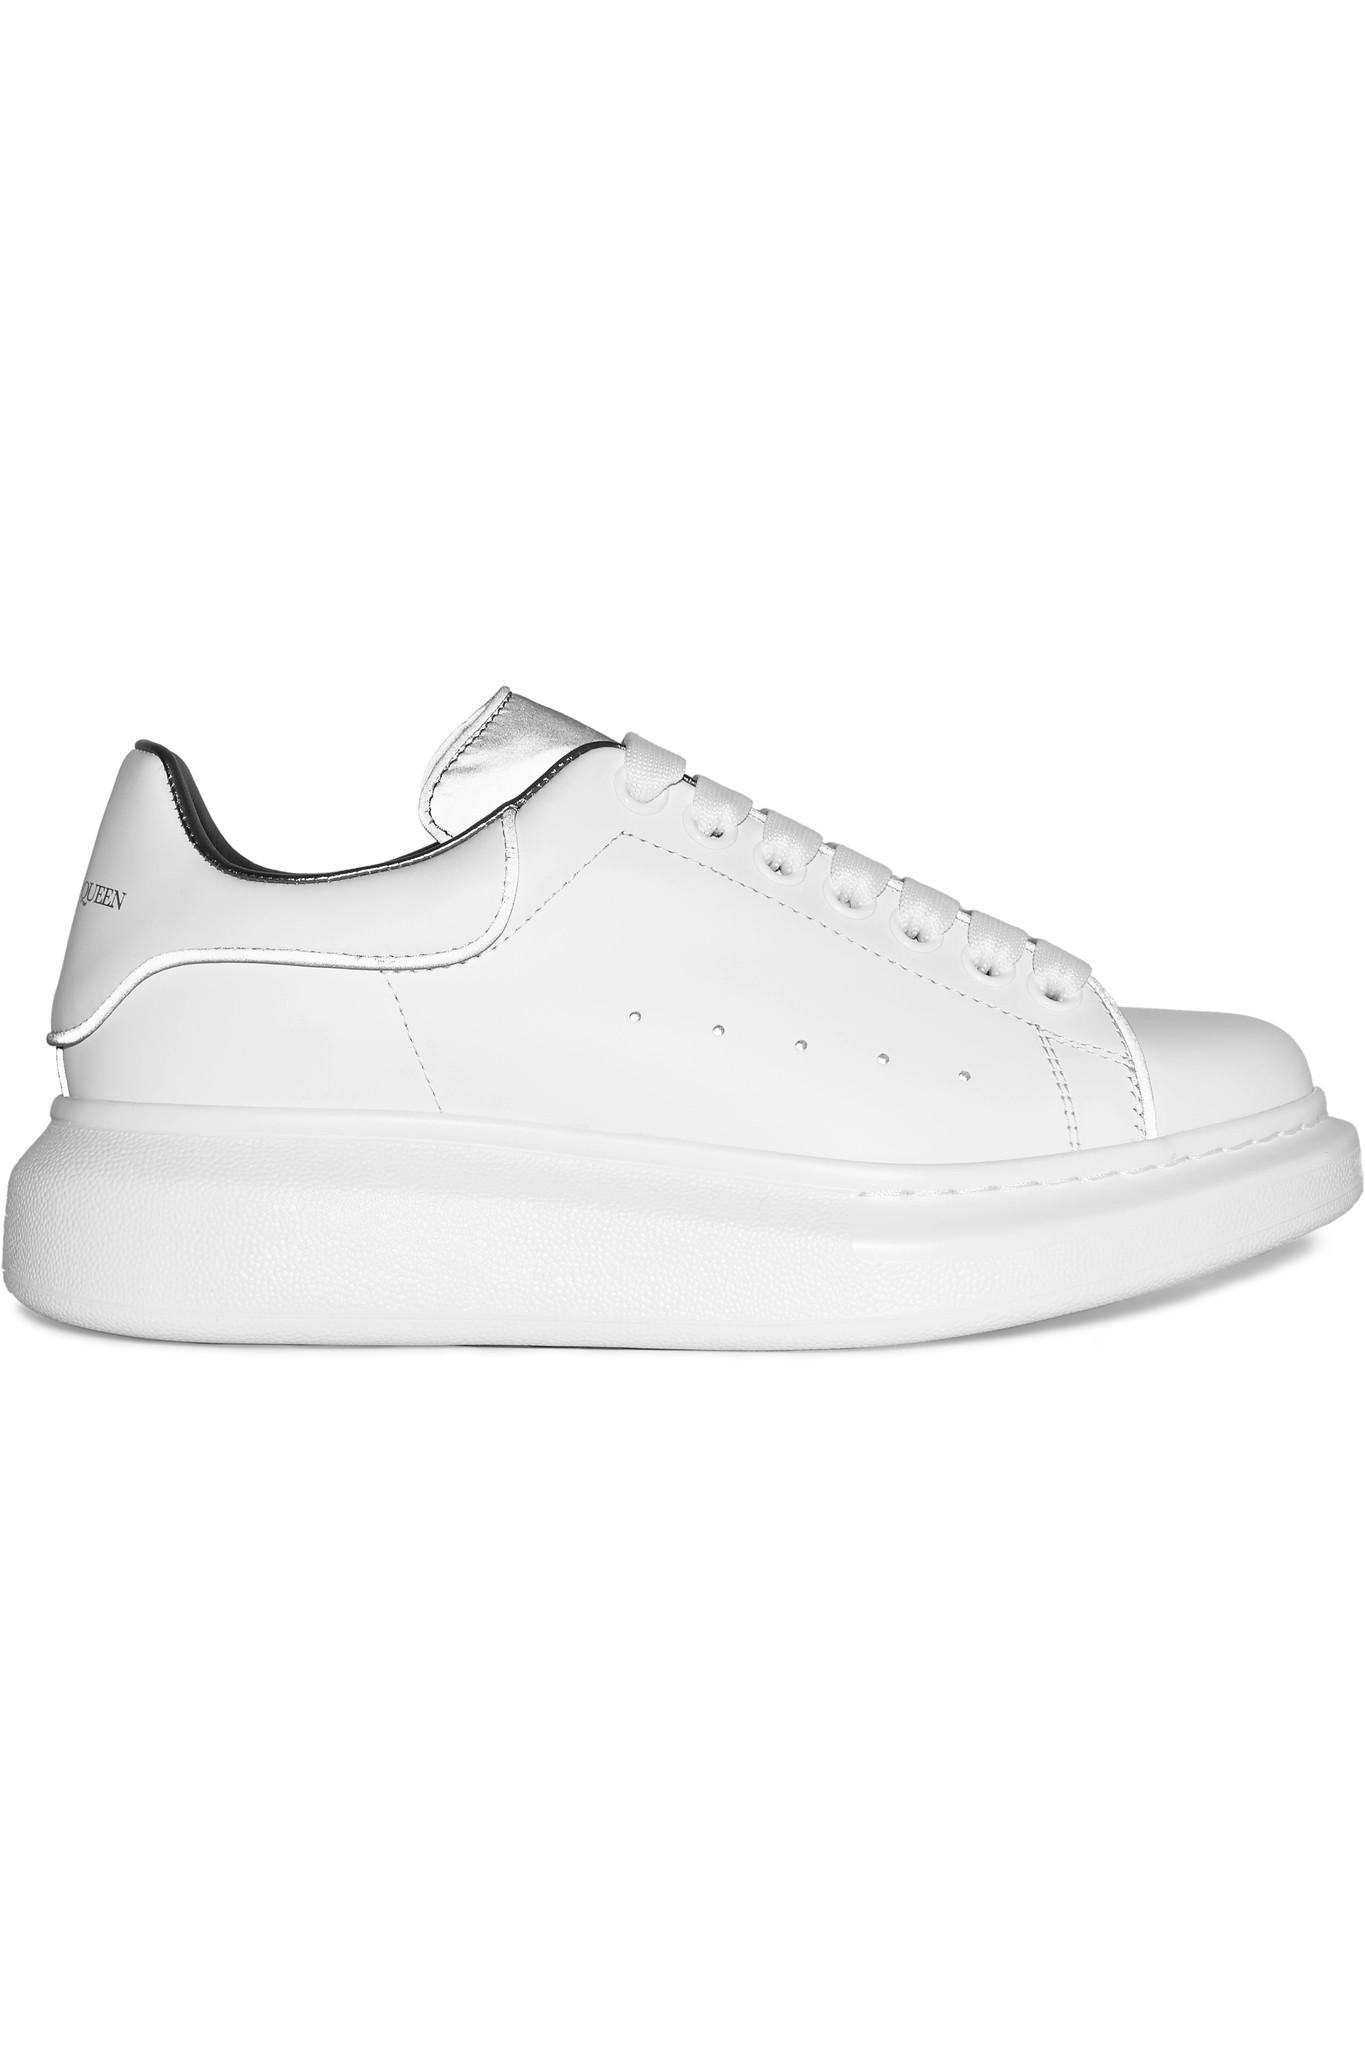 Alexander McQueen Reflective-trimmed Leather Exaggerated-sole Sneakers ...